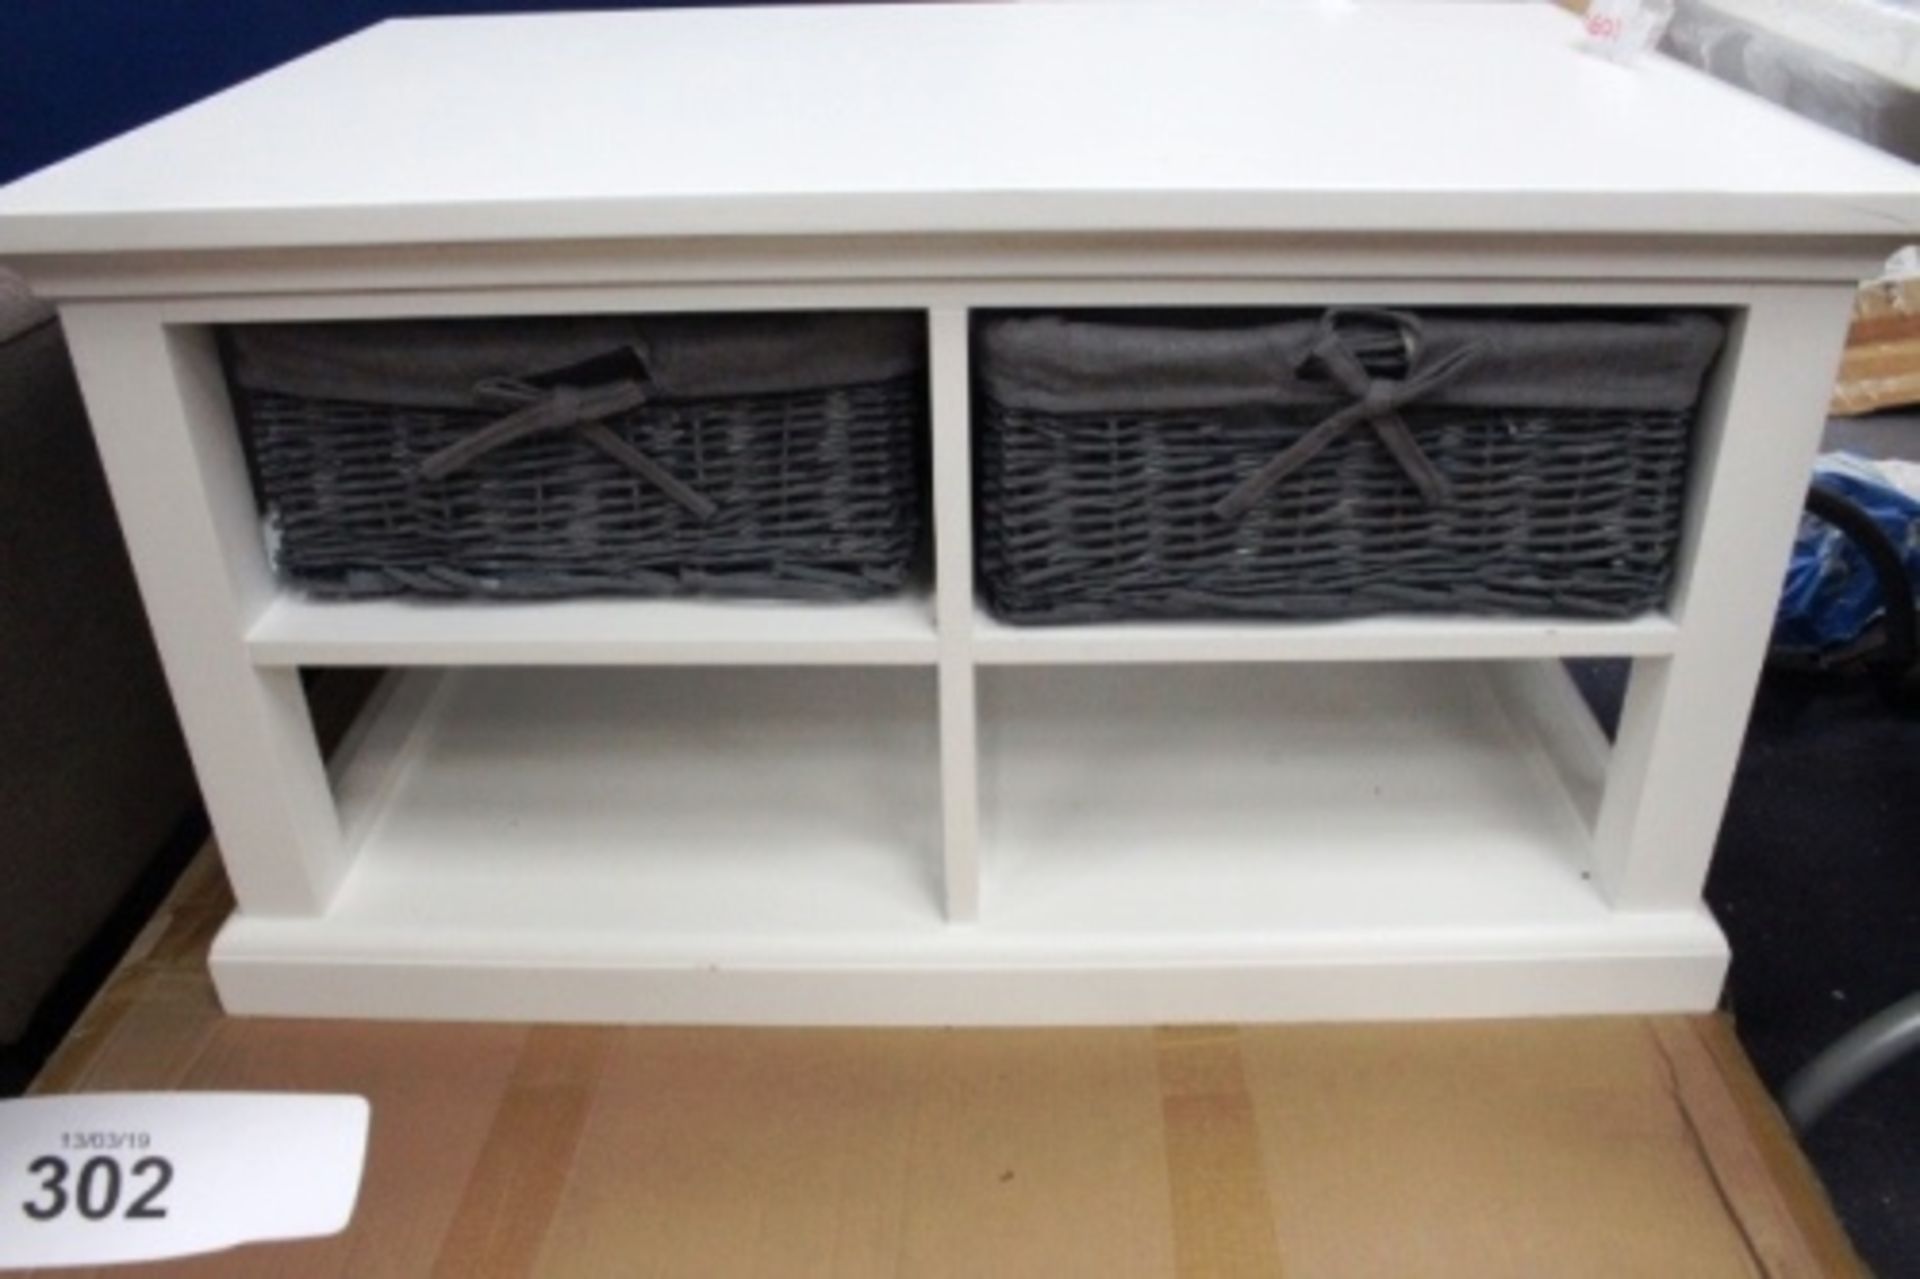 A white coloured coffee table with 4 hole storage and wicker drawers, 890mm x 590mm x 460mm(H) - New